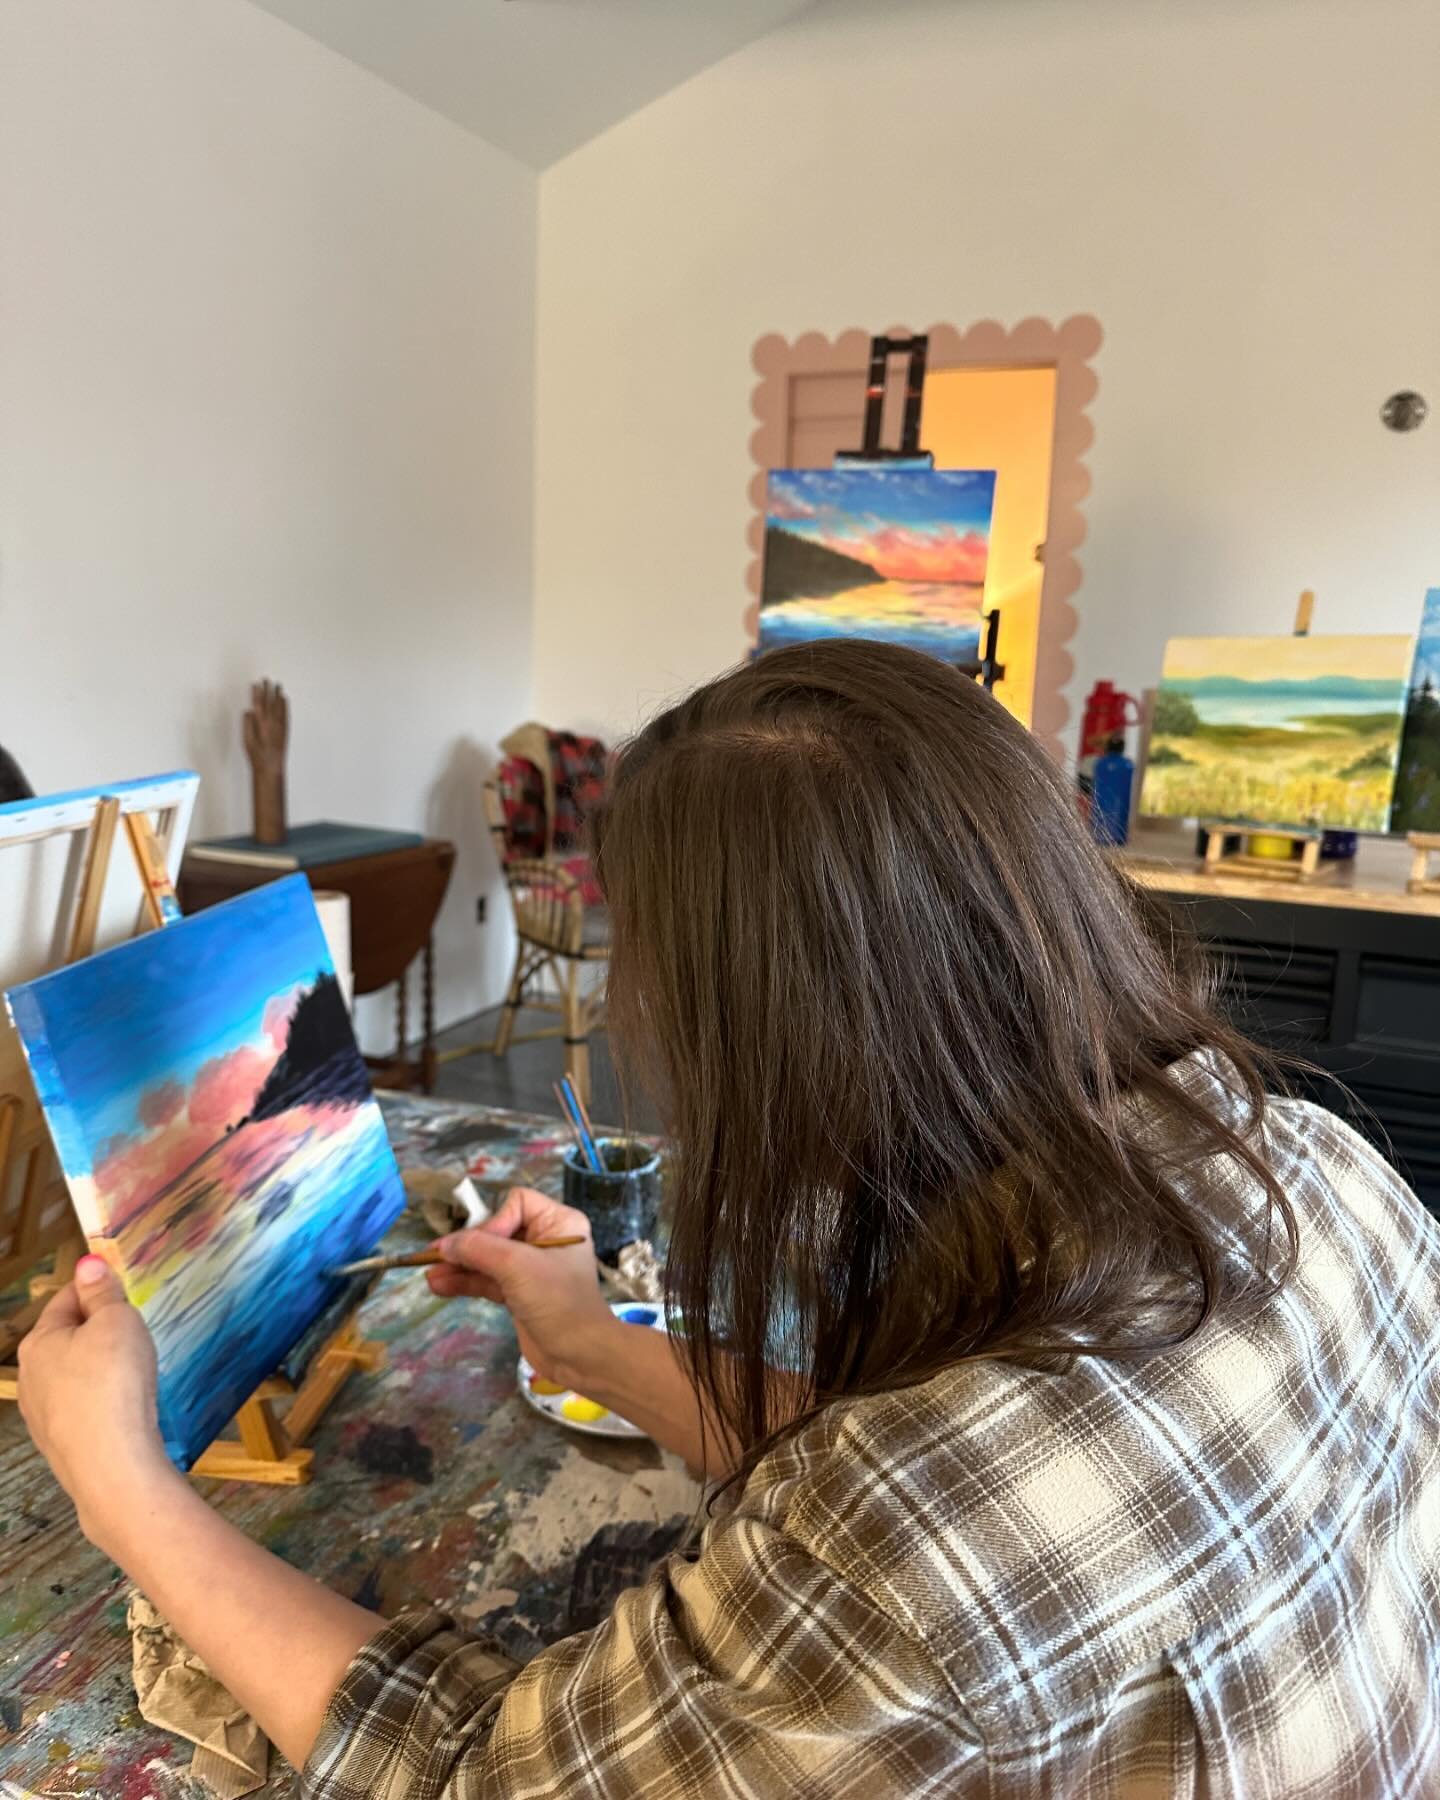 Sometimes you get a class that decides they want to go rouge and you end up with a new painting! I&rsquo;m super in love with my hot pink clouds! 💕

Keep an eye out for this vibrant coastline class June! I&rsquo;ll be adding it to the calendar soon!